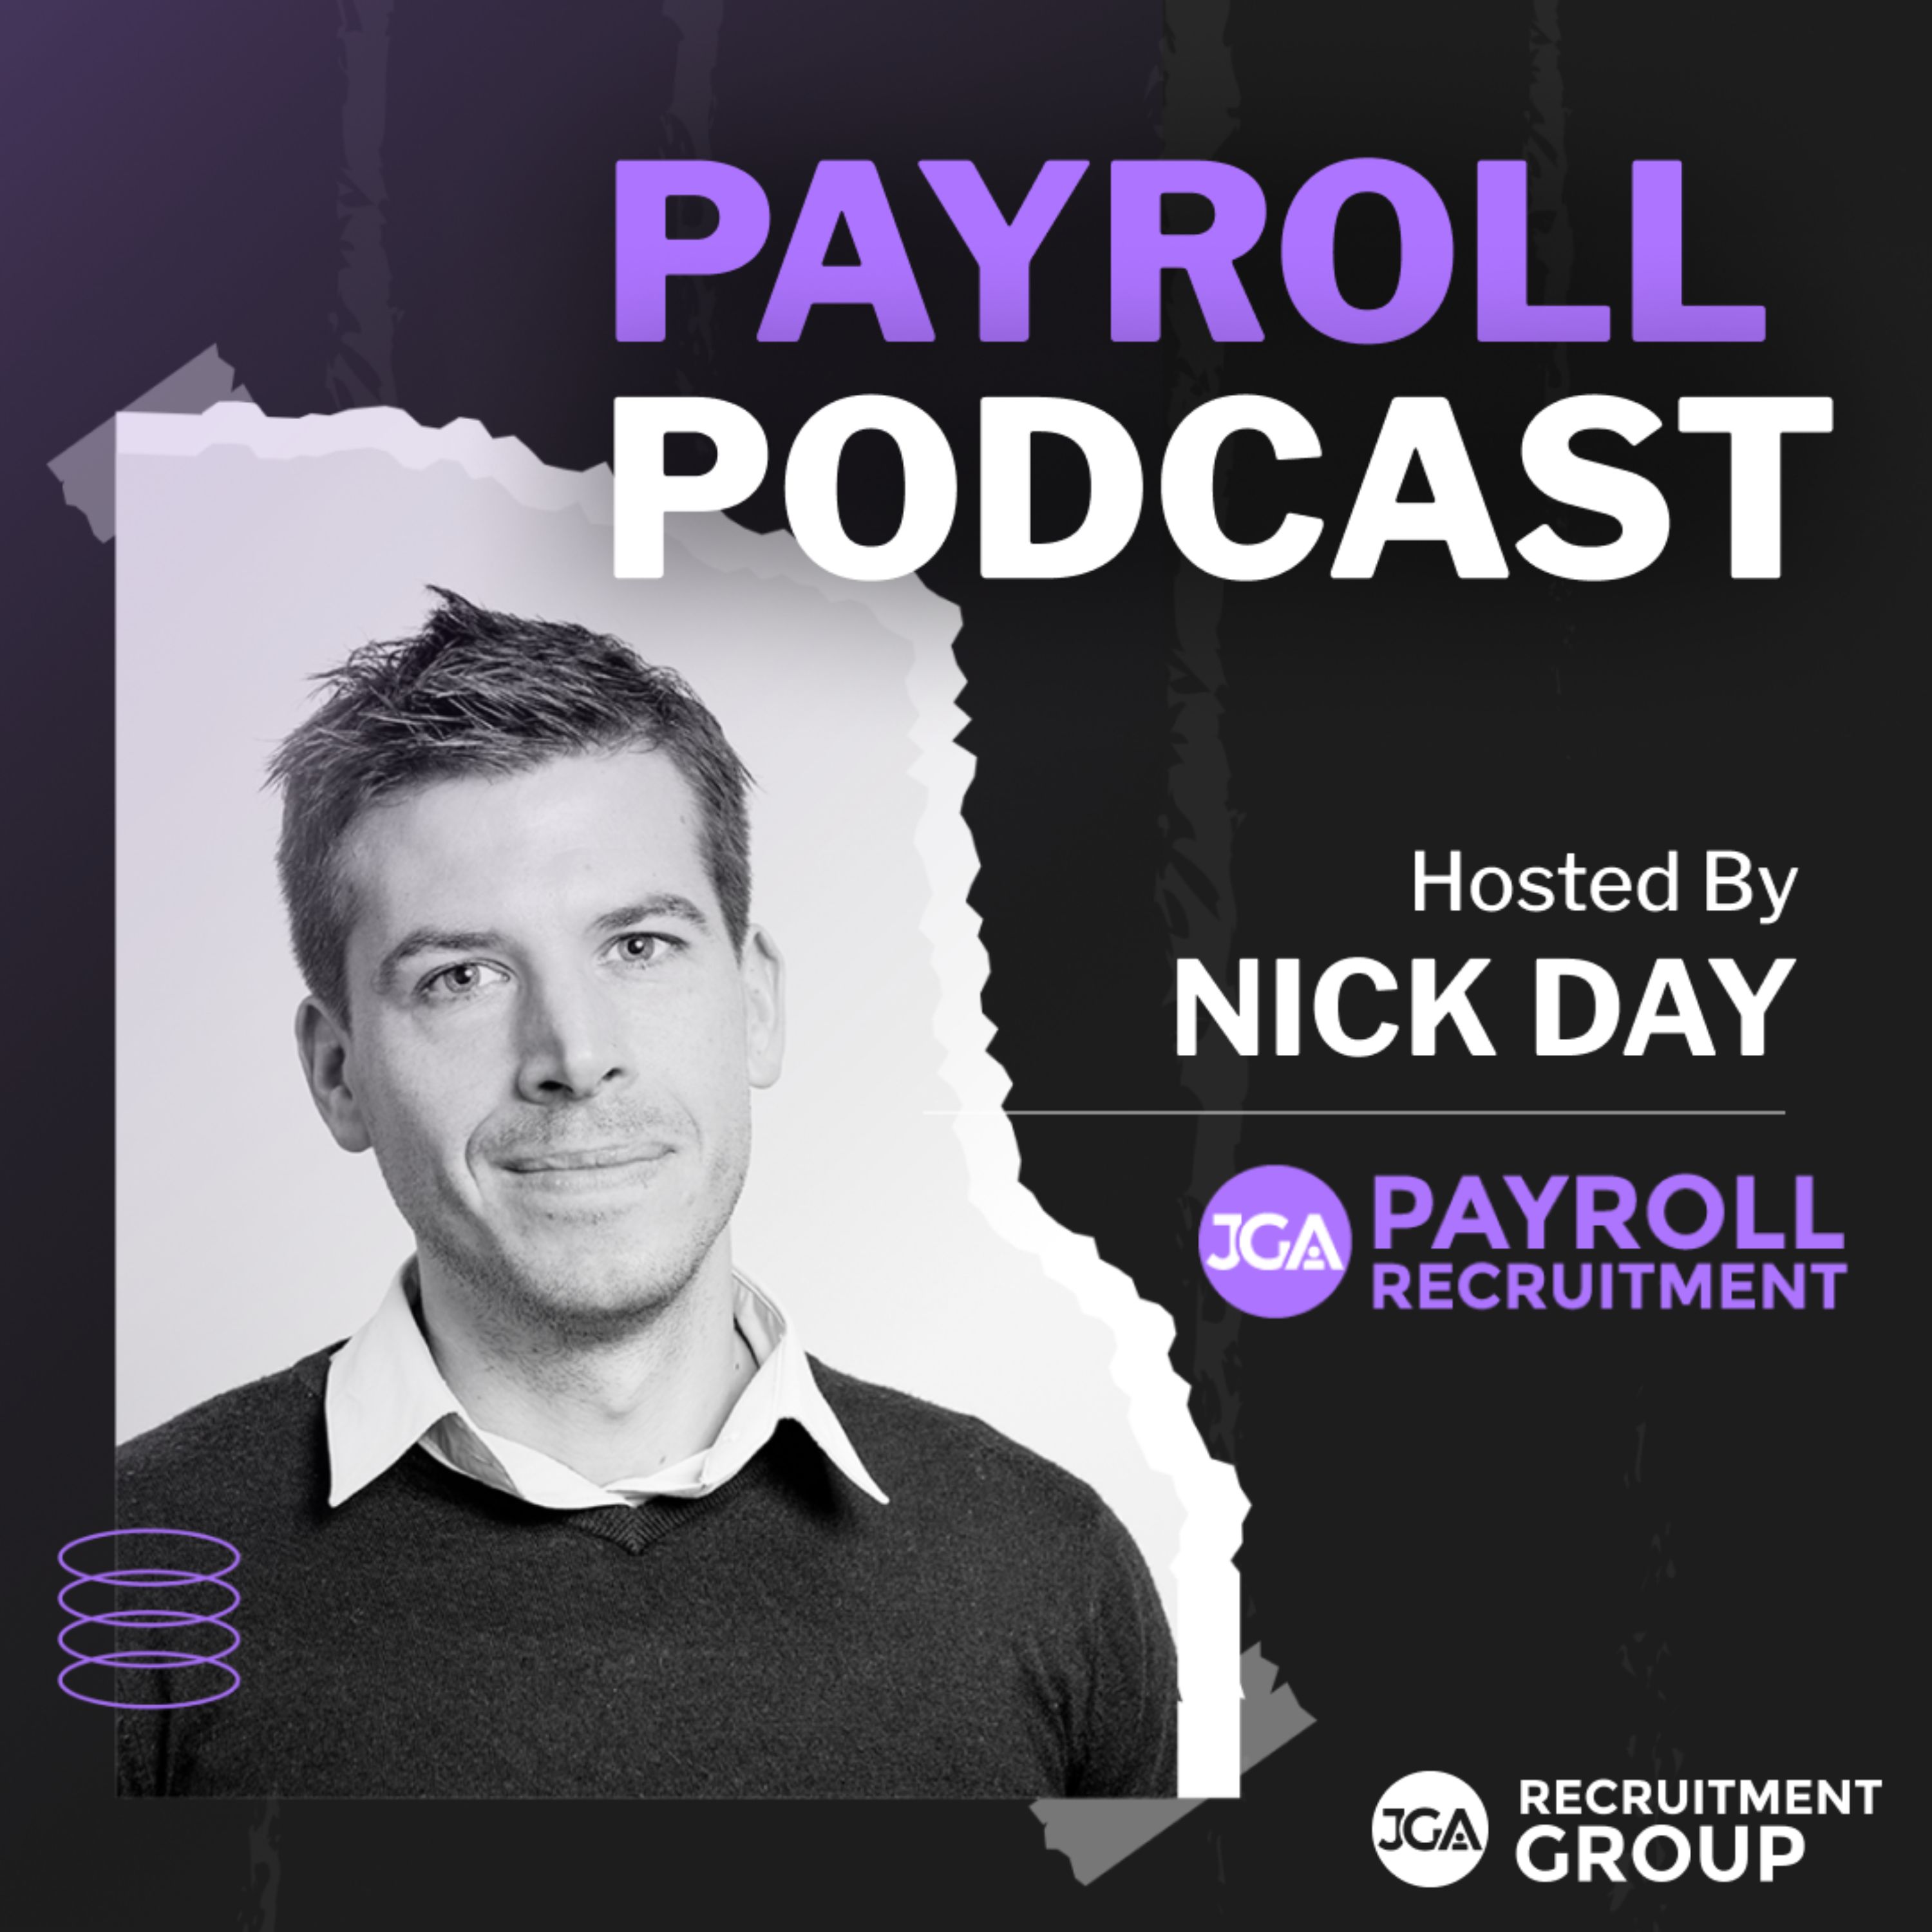 The Payroll Podcast: Episode 100 Special with Nick Day! #100